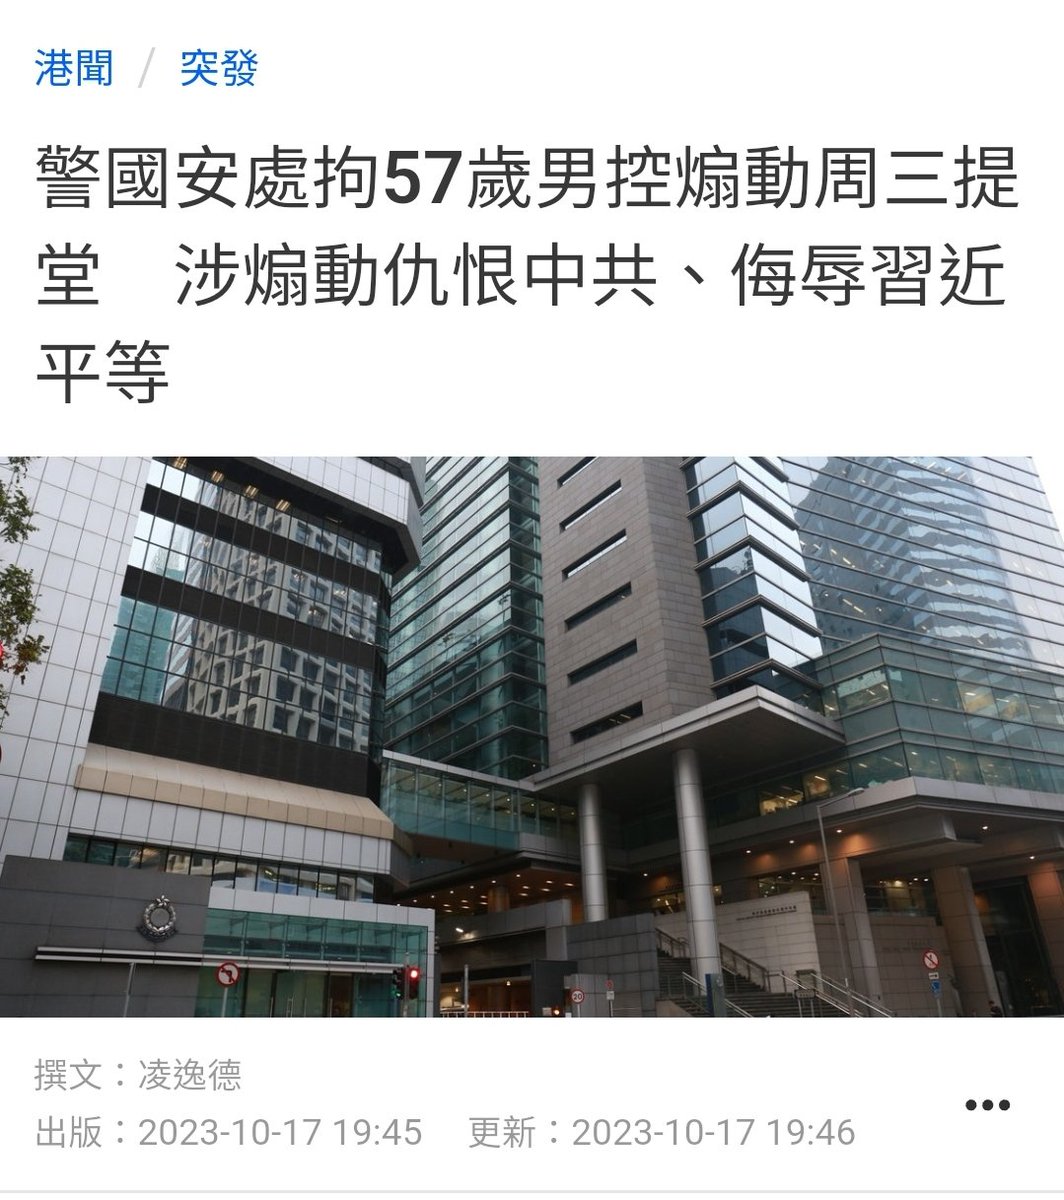 A 57 yrs old man is arrested today by #NationalSecurity for 'insulting' #XiJinping #HKPolice in FB & X, Court tmr. Meanwhile, a 21 yrs old man was bailed $5K and Court again in Dec for 'insulting' #CCPChina anthem by not stood up in Volleyball game.